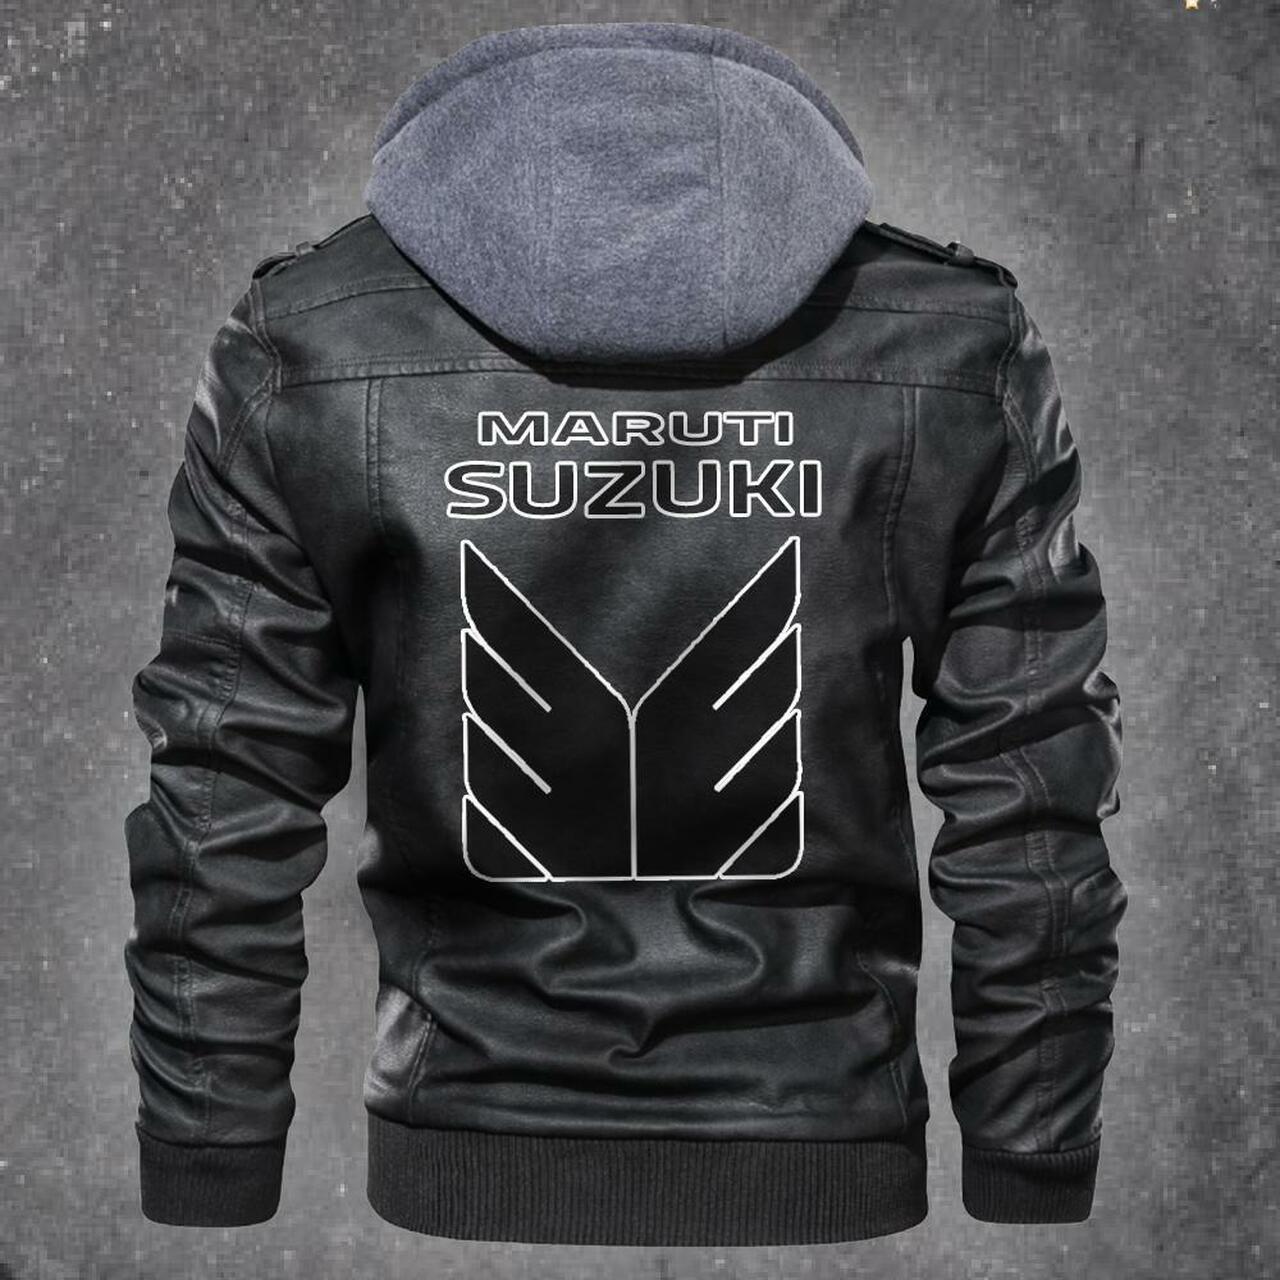 You can find Leather Jacket online at a great price 150